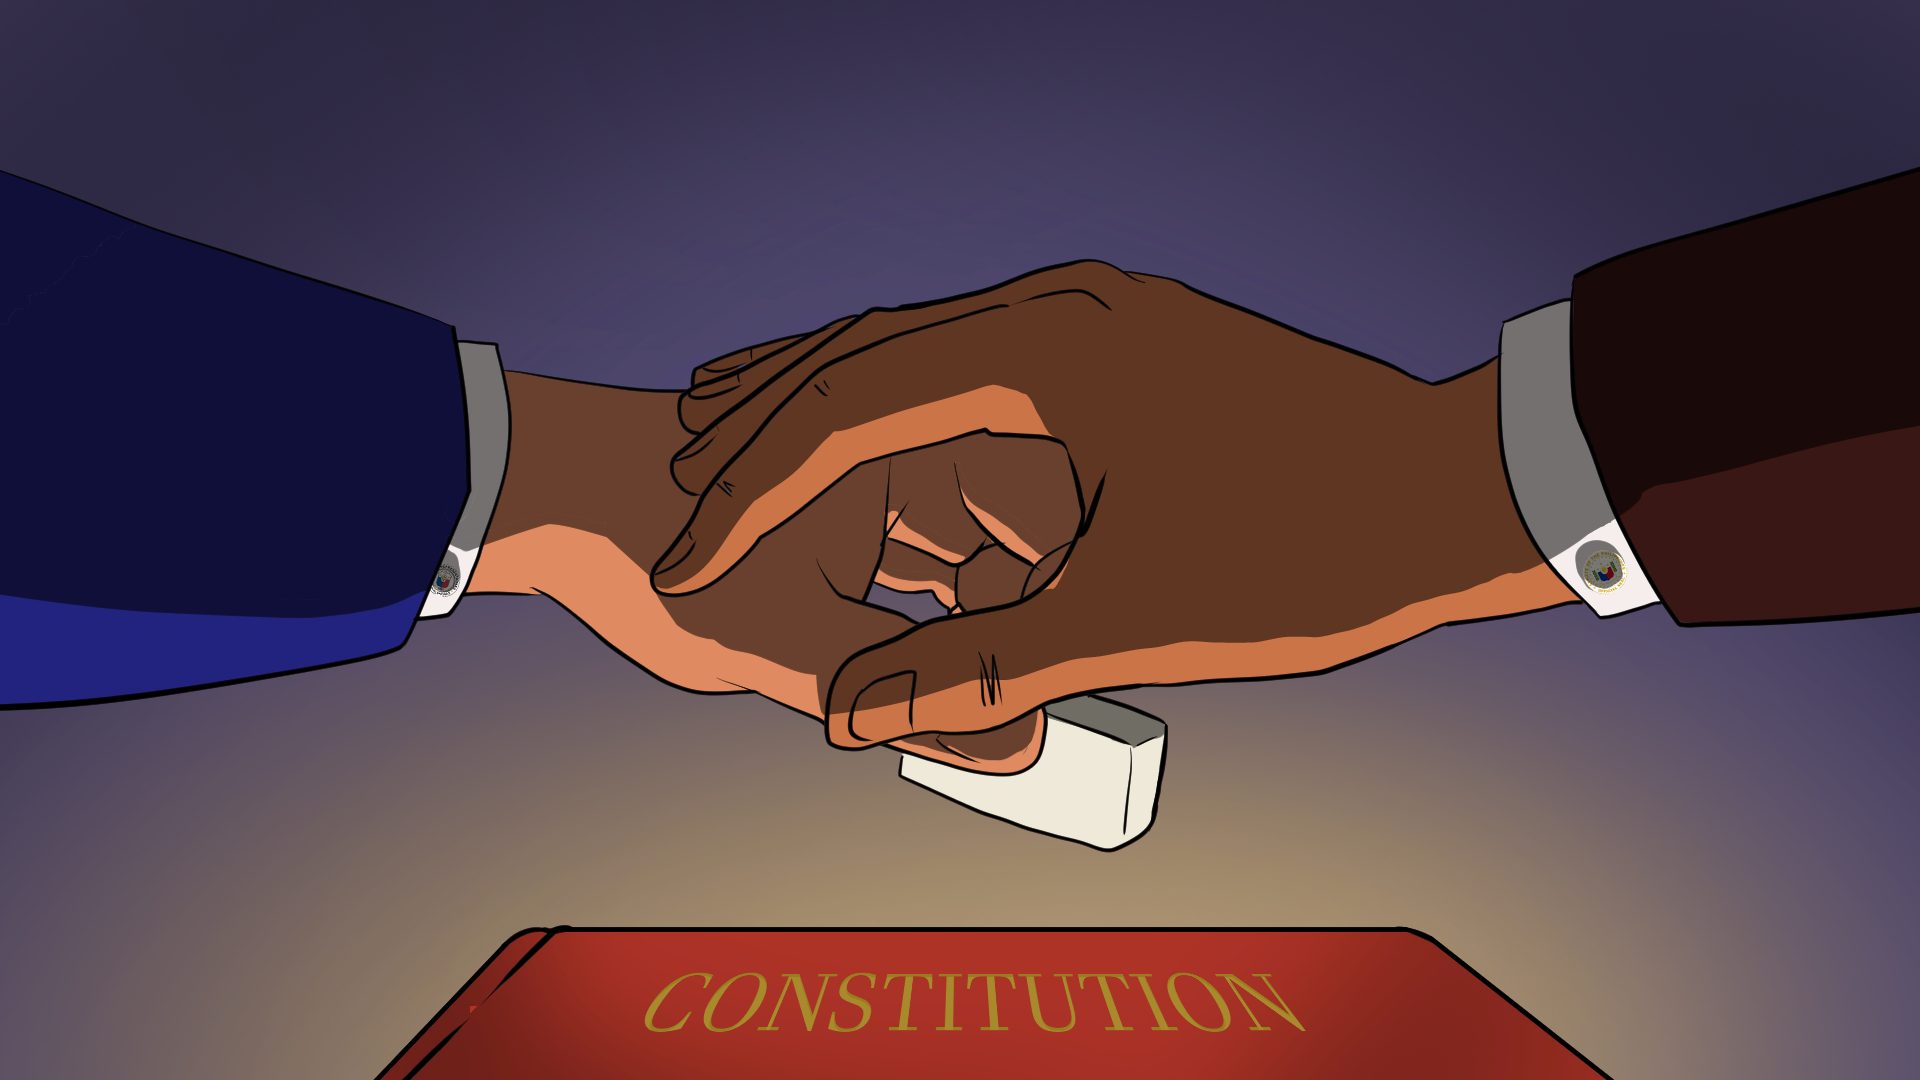 [OPINION] The Senate, the Constitution, and the price of self-preservation